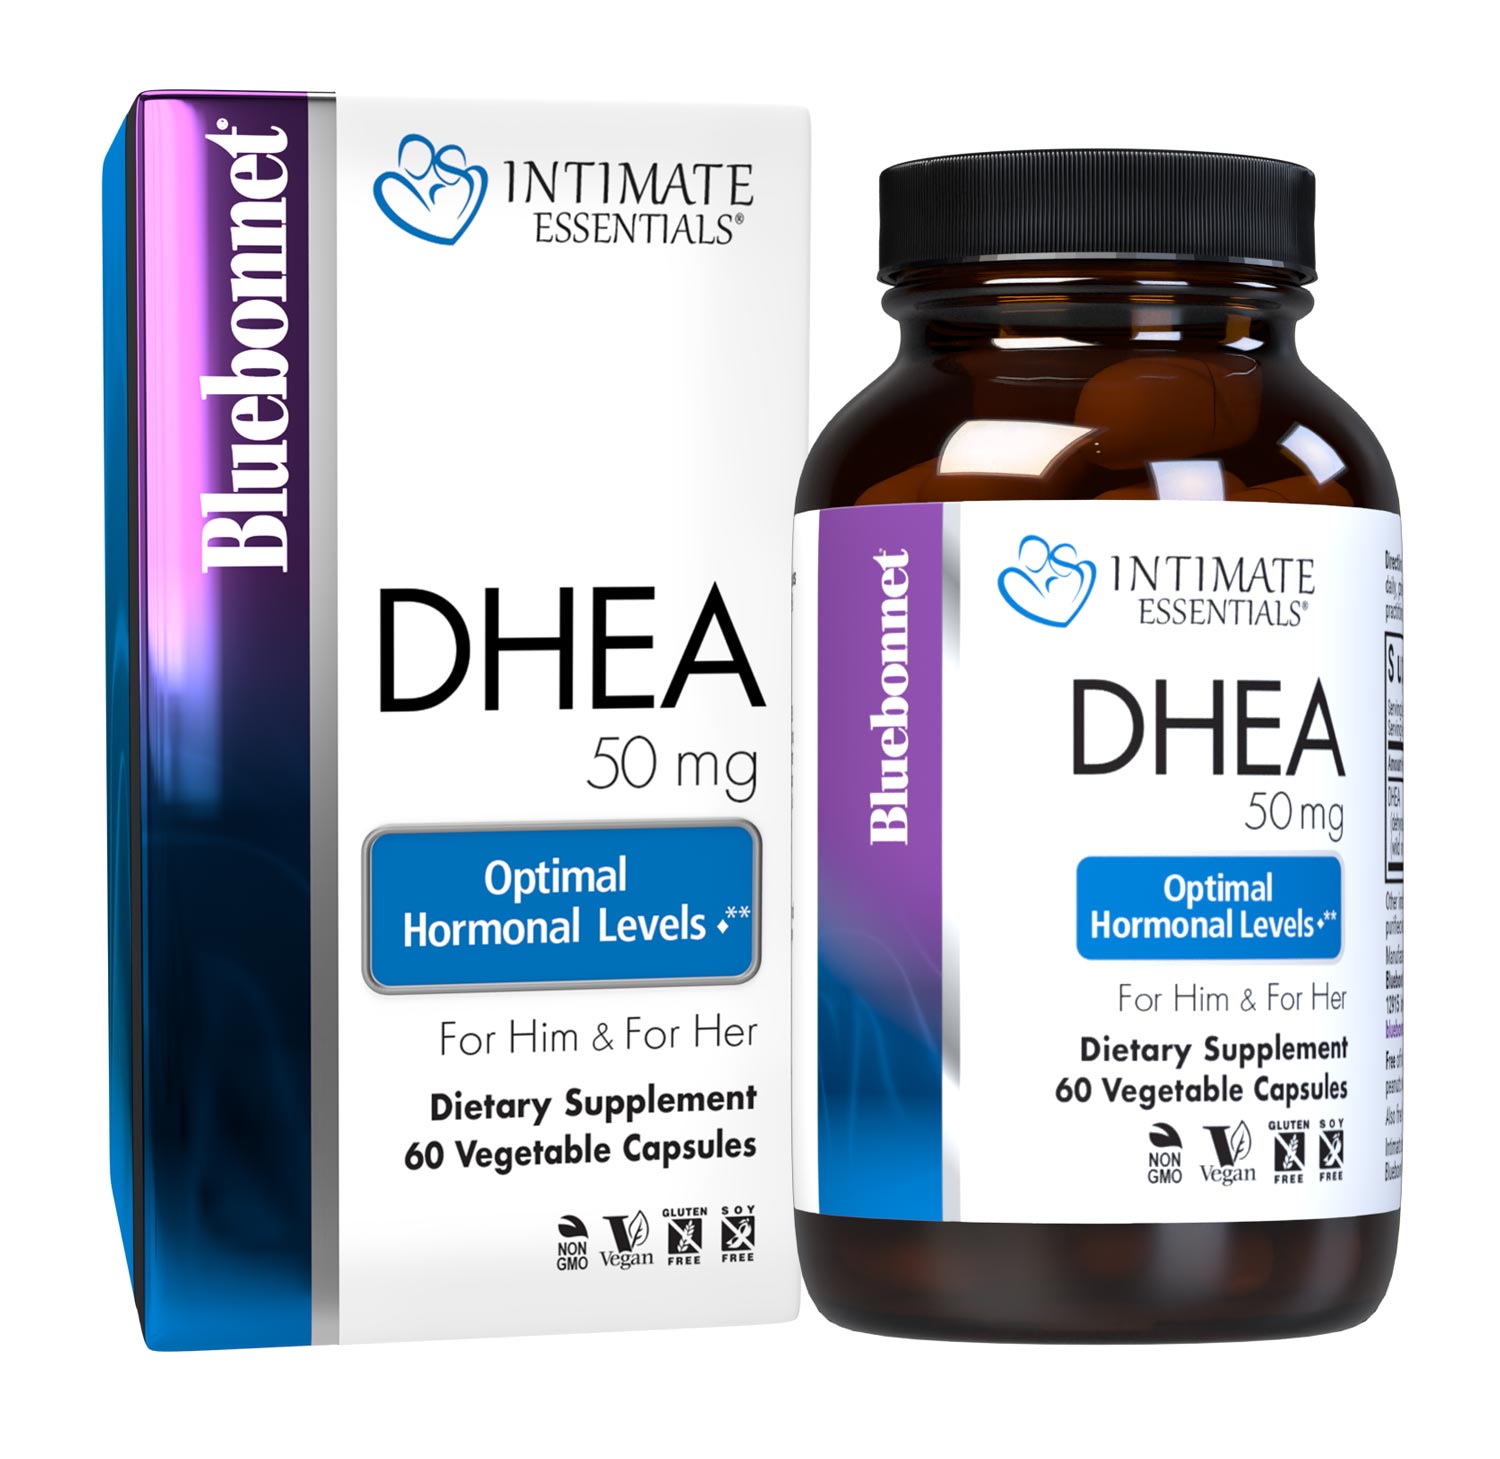 Bluebonnet’s Intimate Essentials DHEA 50 mg 60 pill count bottle comes in box. #size_60 count